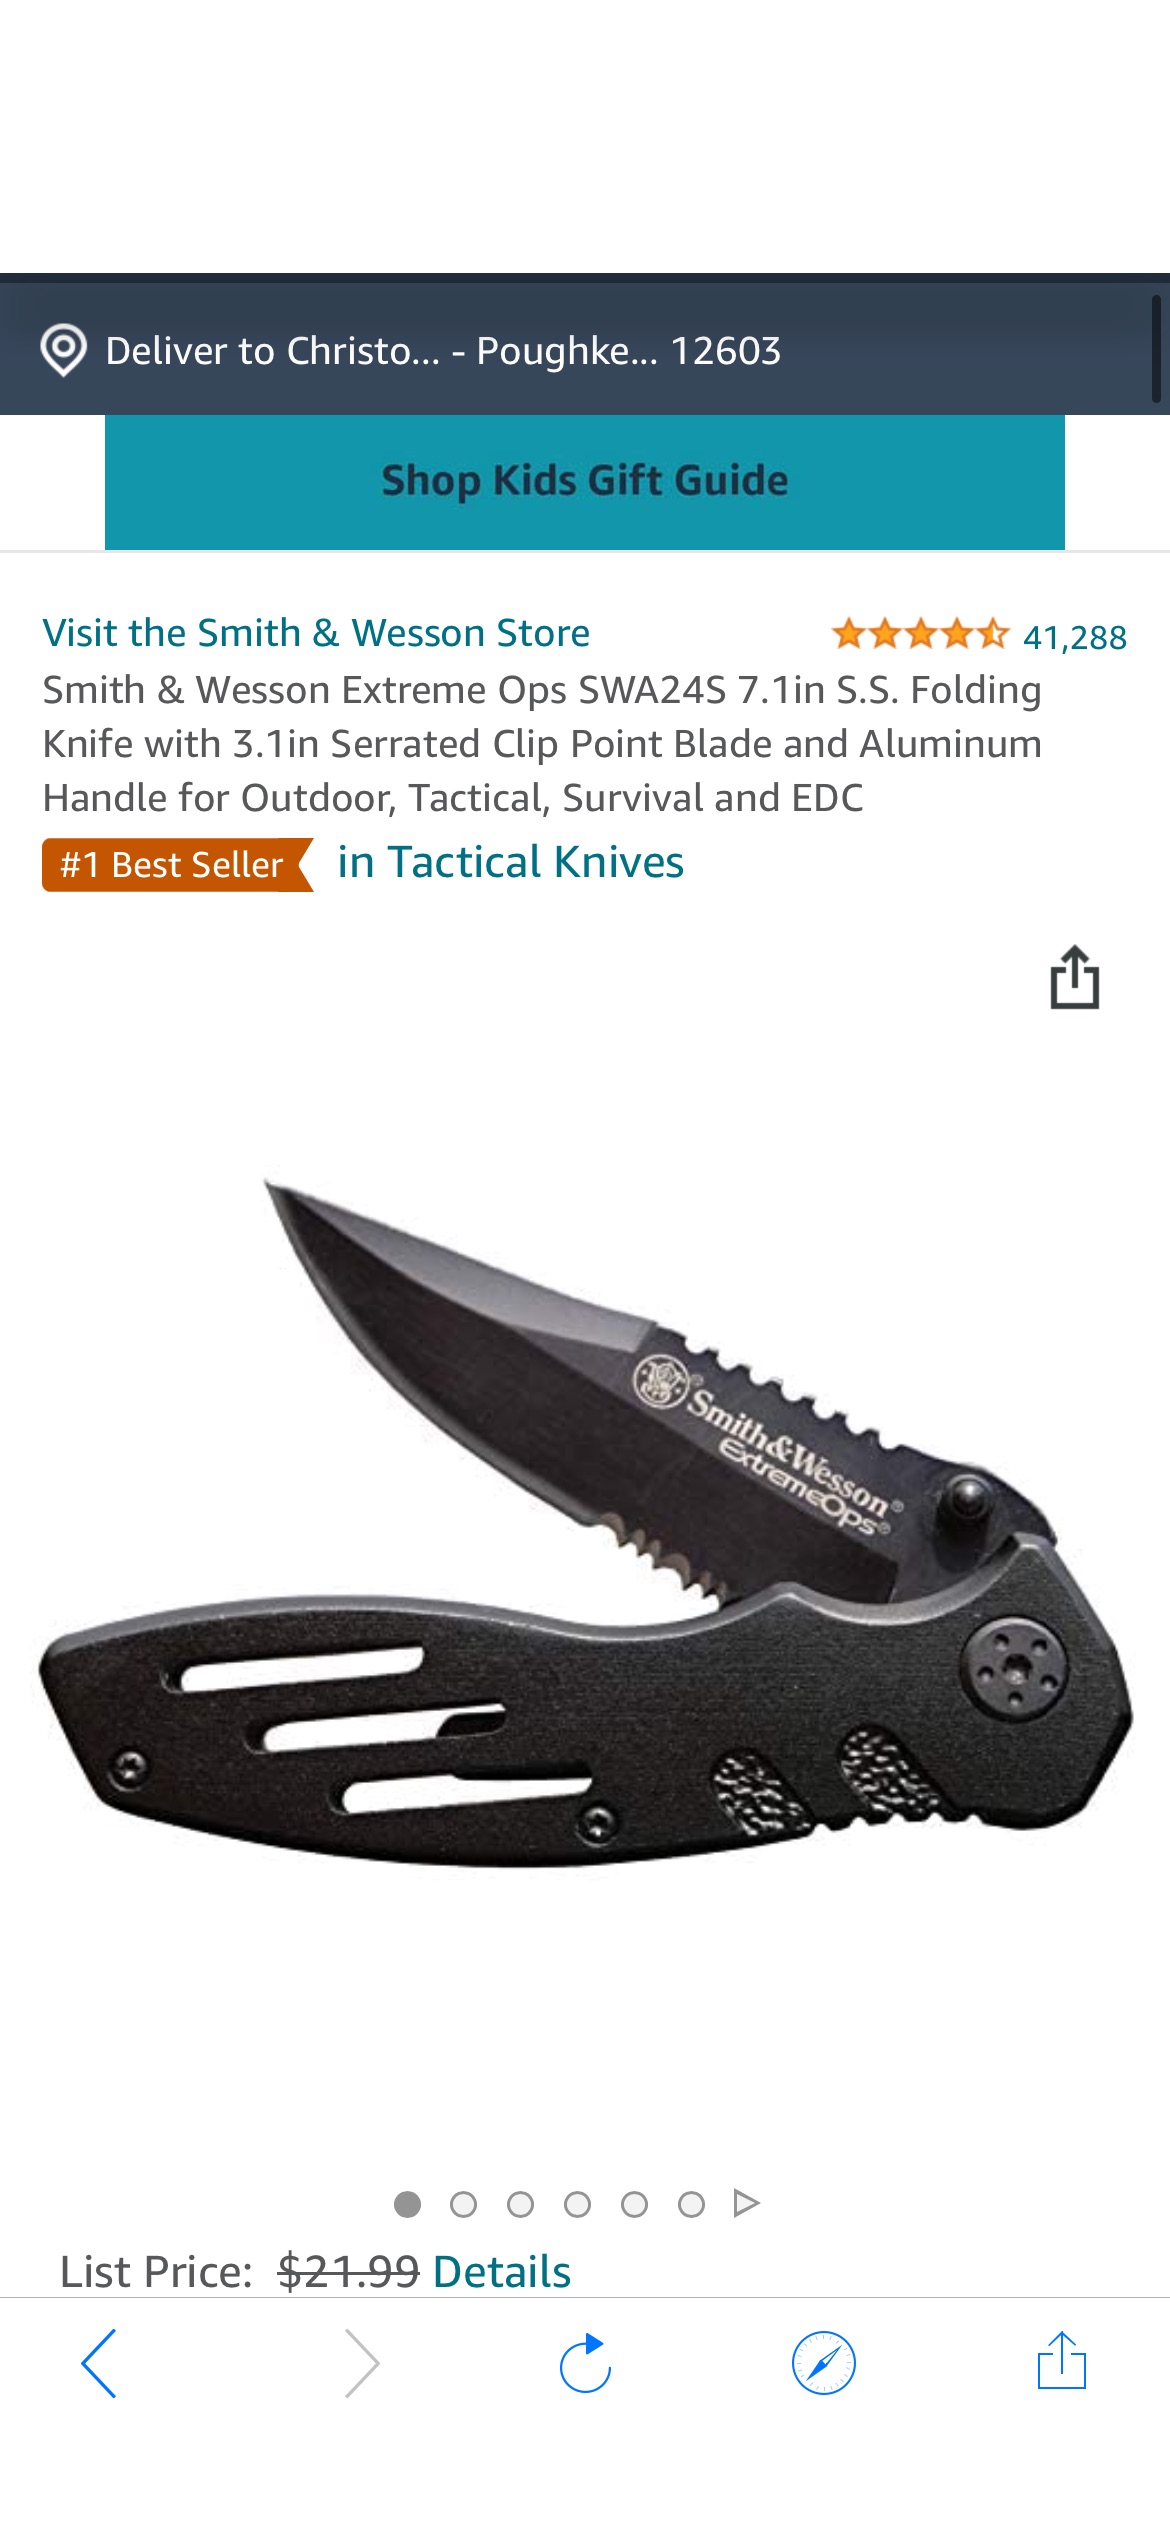 Amazon.com : Smith & Wesson Extreme Ops SWA24S 7.1in S.S. Folding Knife with 3.1in Serrated Clip Point Blade and Aluminum刀